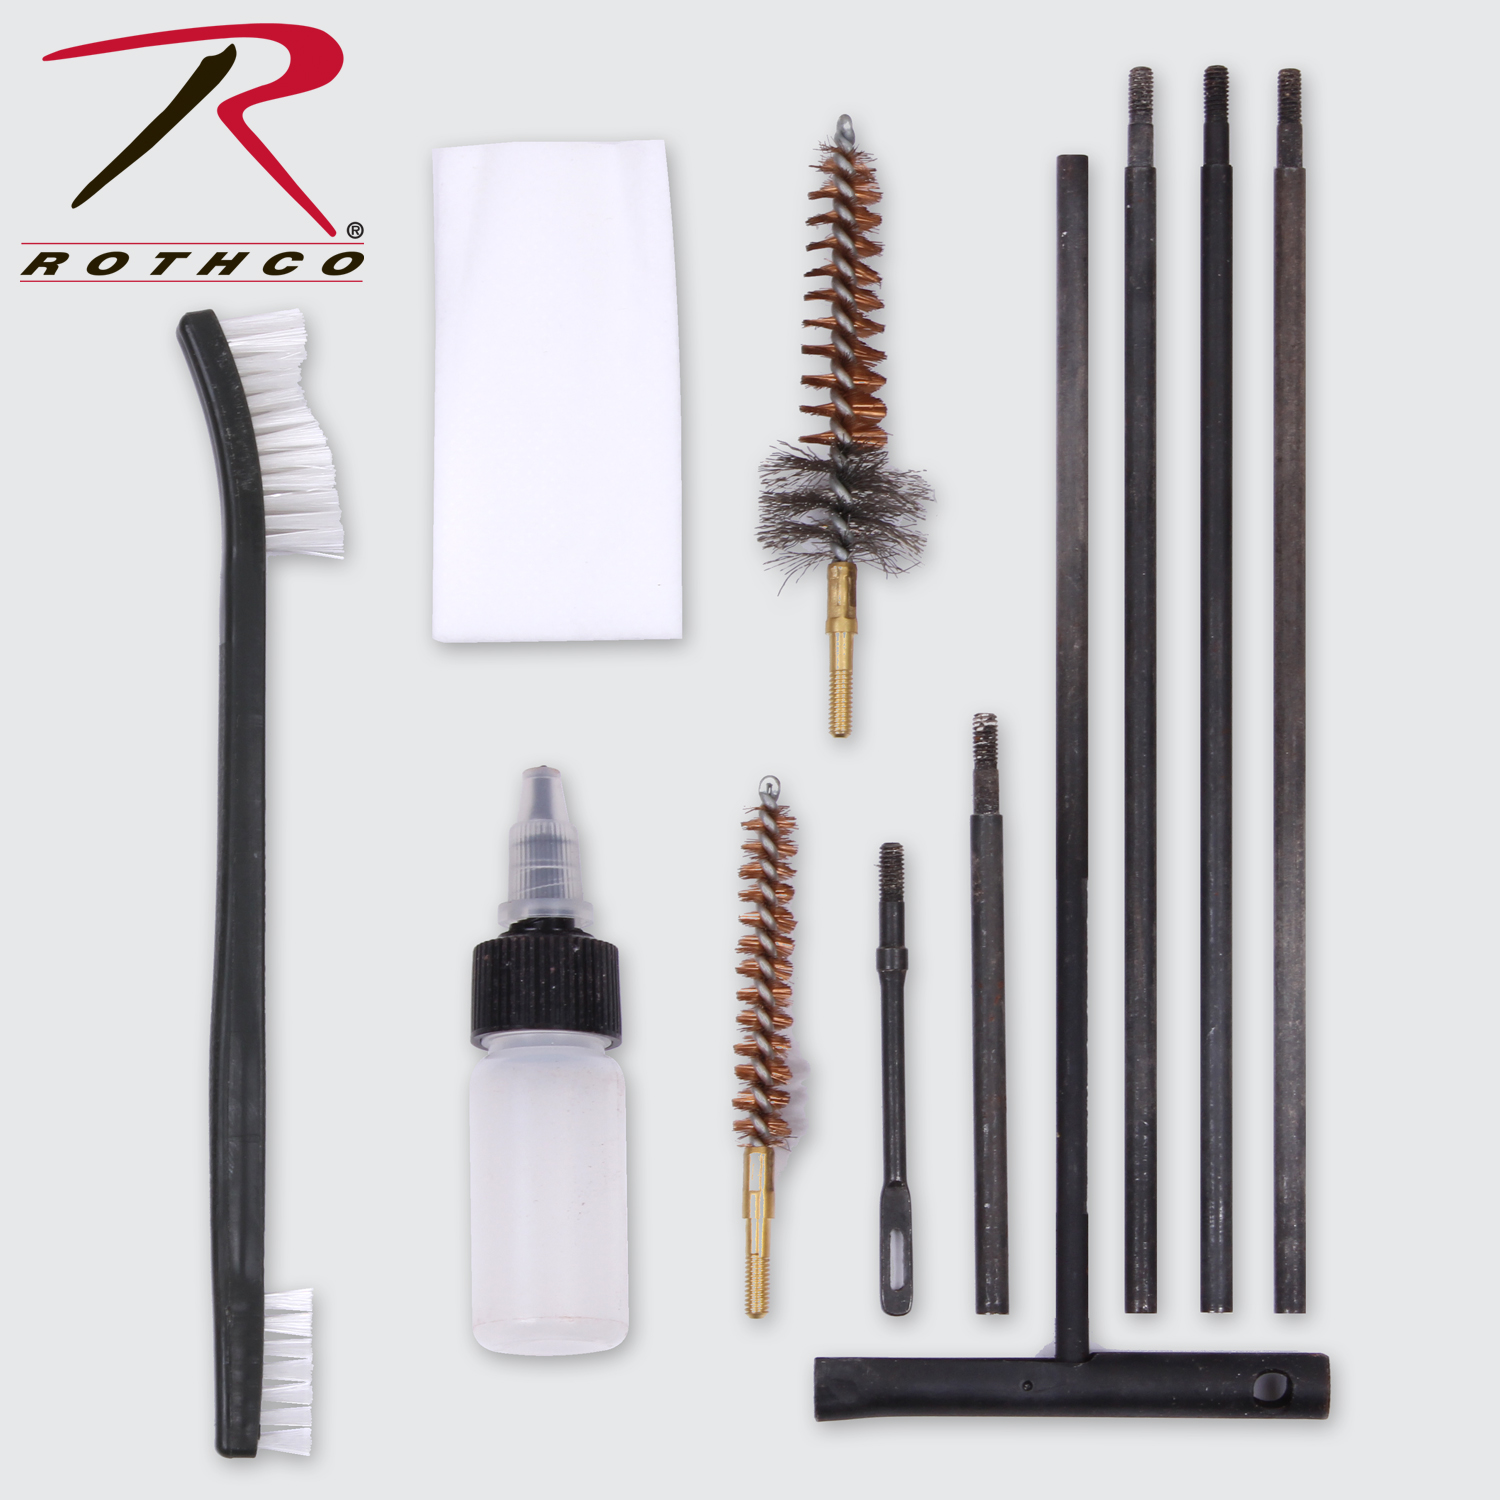 Rothco AK-47 Rifle Cleaning Kit